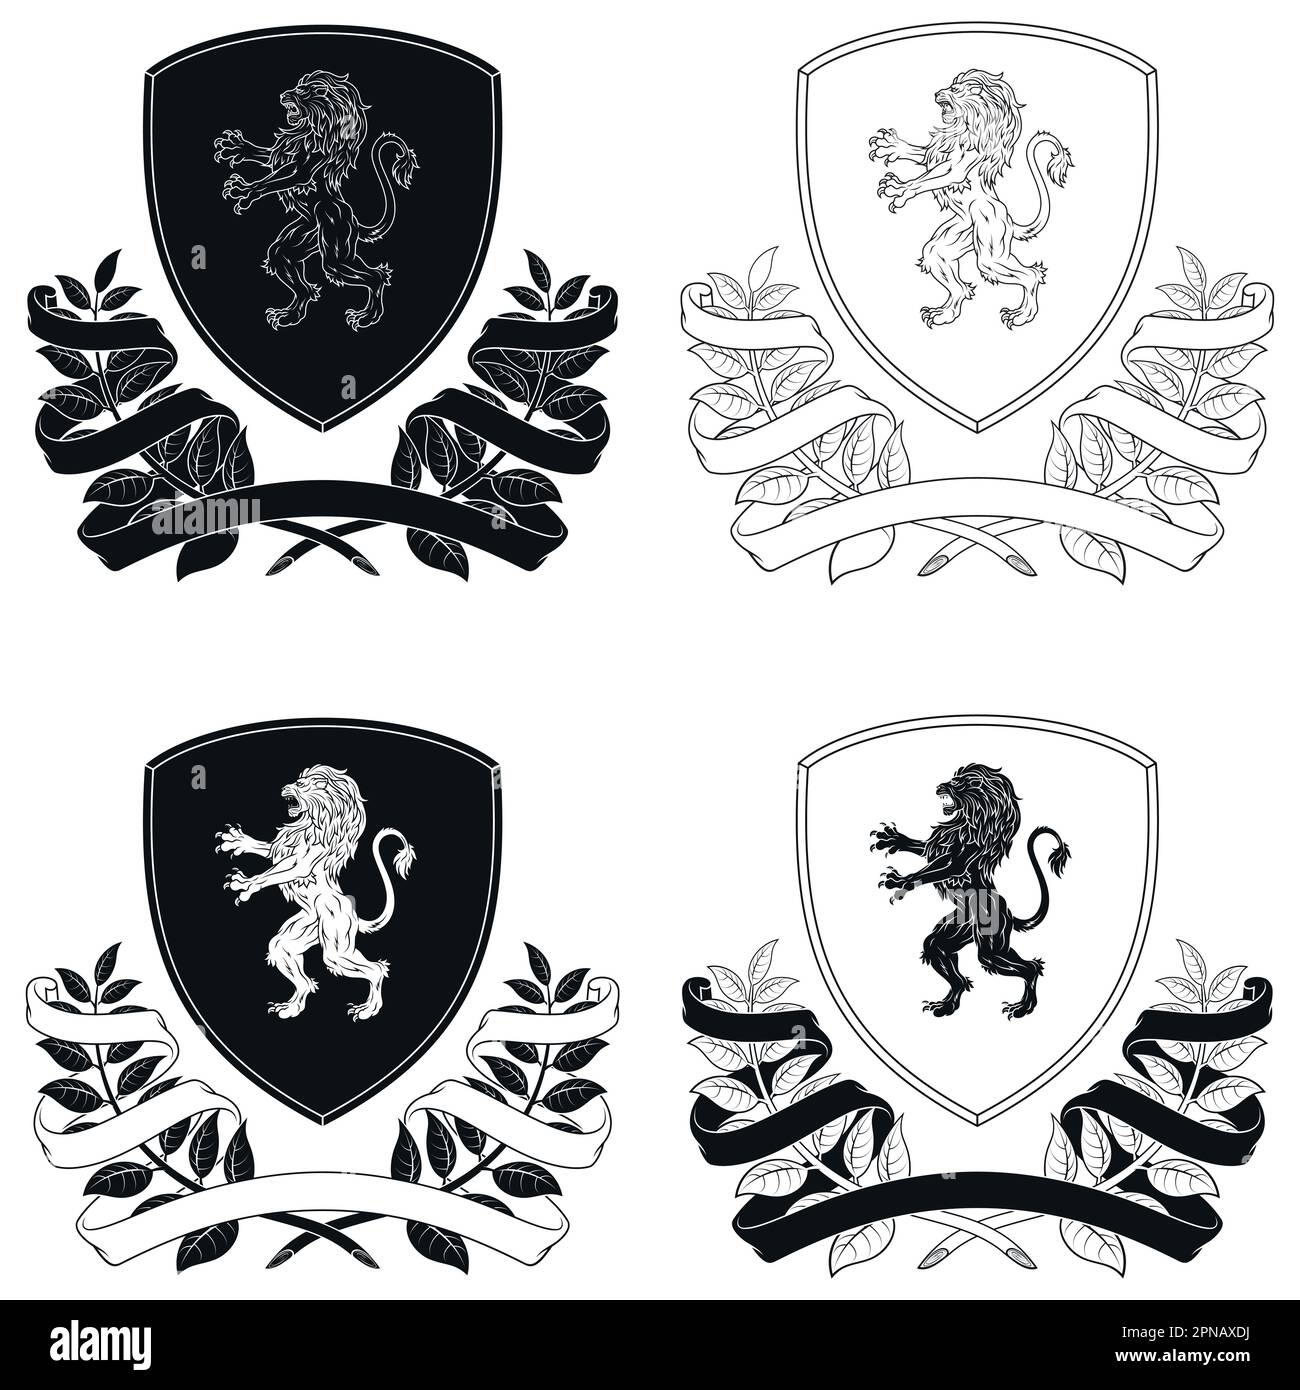 Vector design of heraldic shield of the Middle Ages, noble shield of the European monarchy with rampant lion, laurel wreath and ribbon Stock Vector